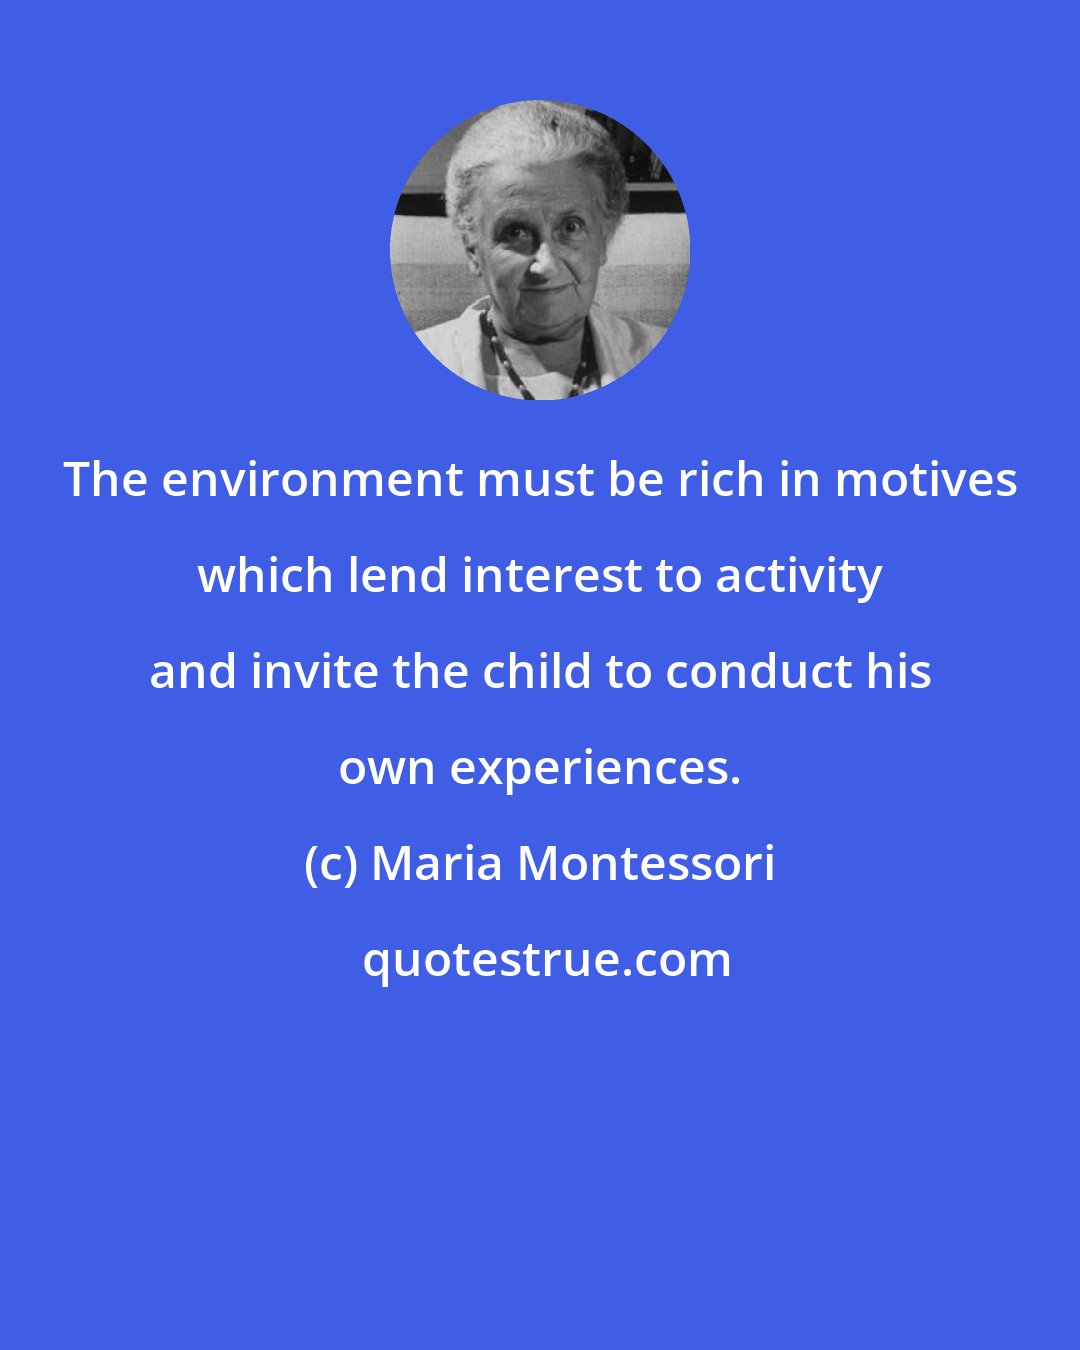 Maria Montessori: The environment must be rich in motives which lend interest to activity and invite the child to conduct his own experiences.